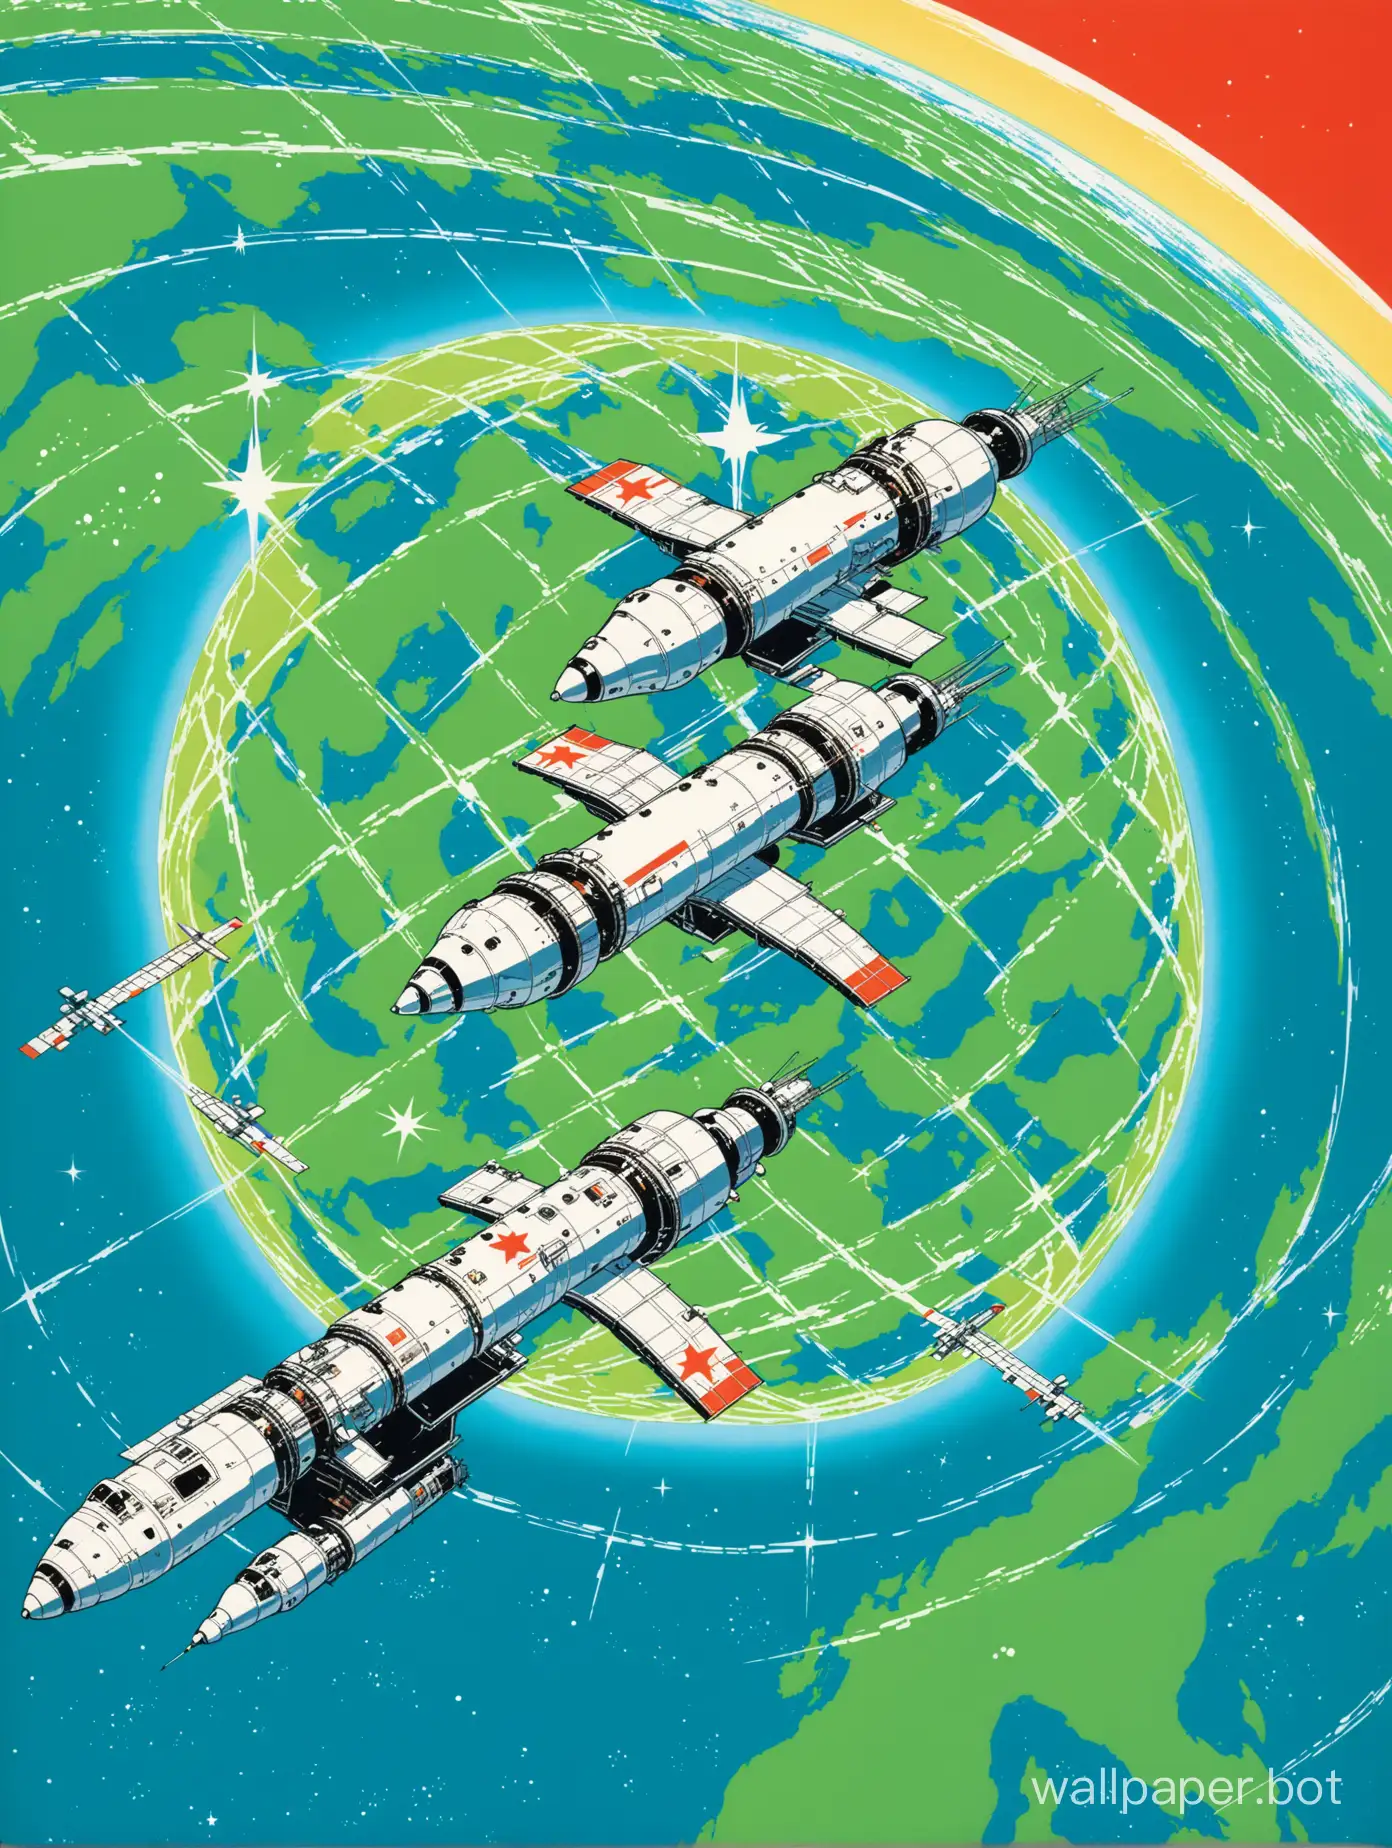 Soviet MIR space stations above the green Earth 80-s peace
